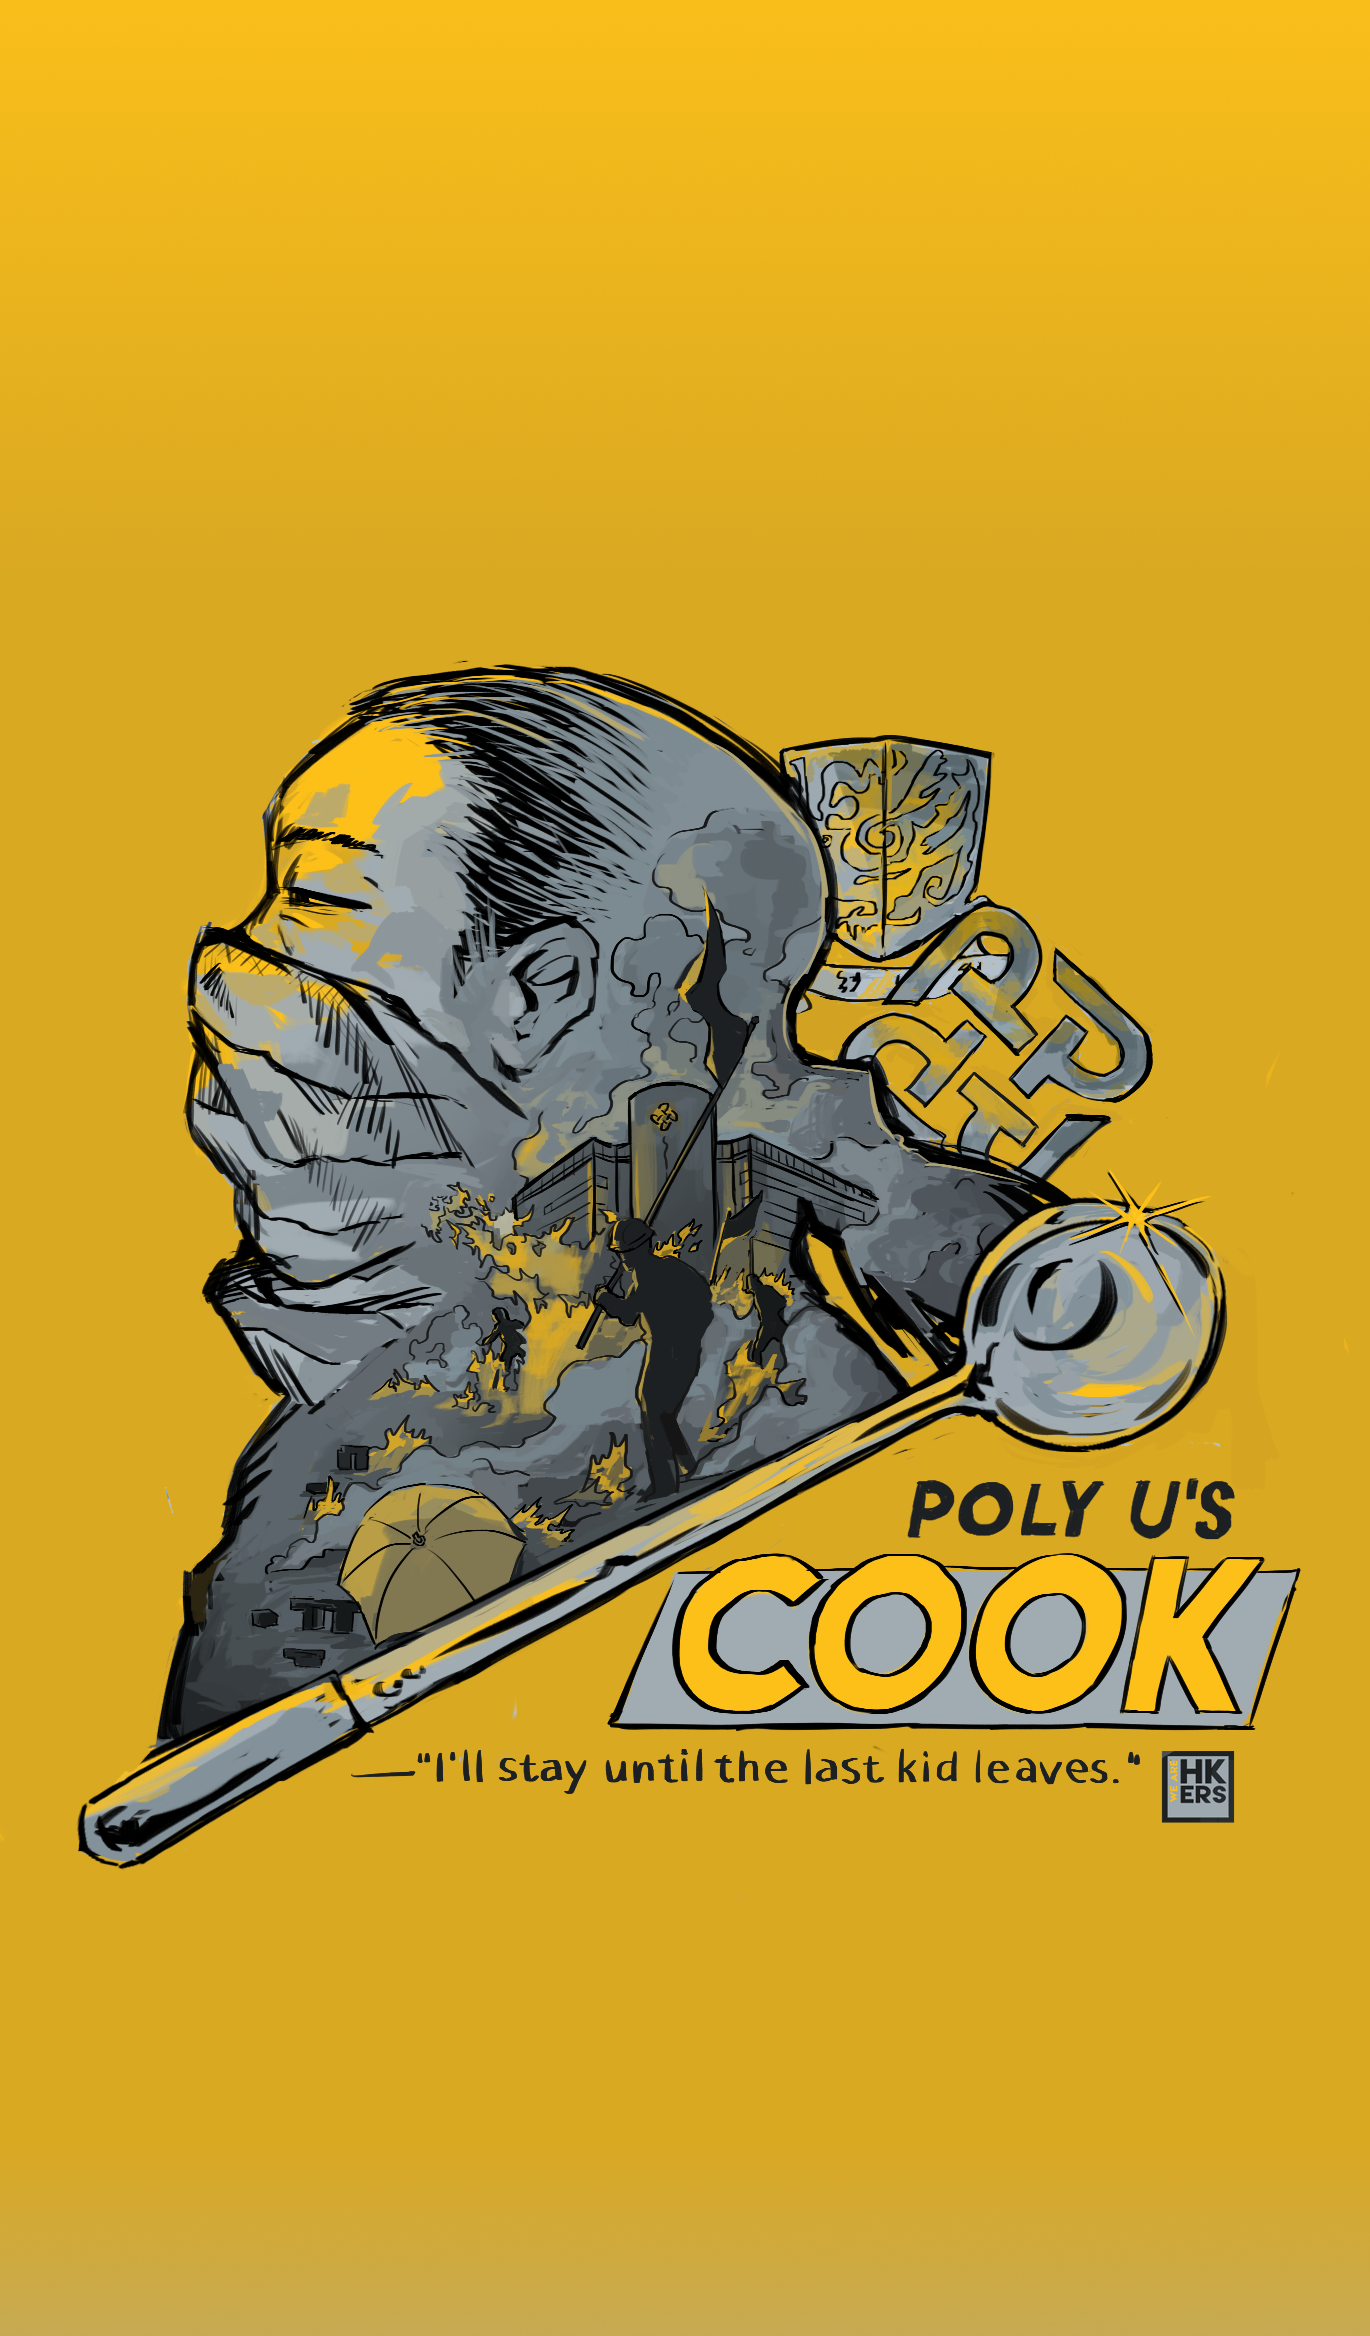 Poly U's Cook - “I’ll stay, as long as someone here needs me.”